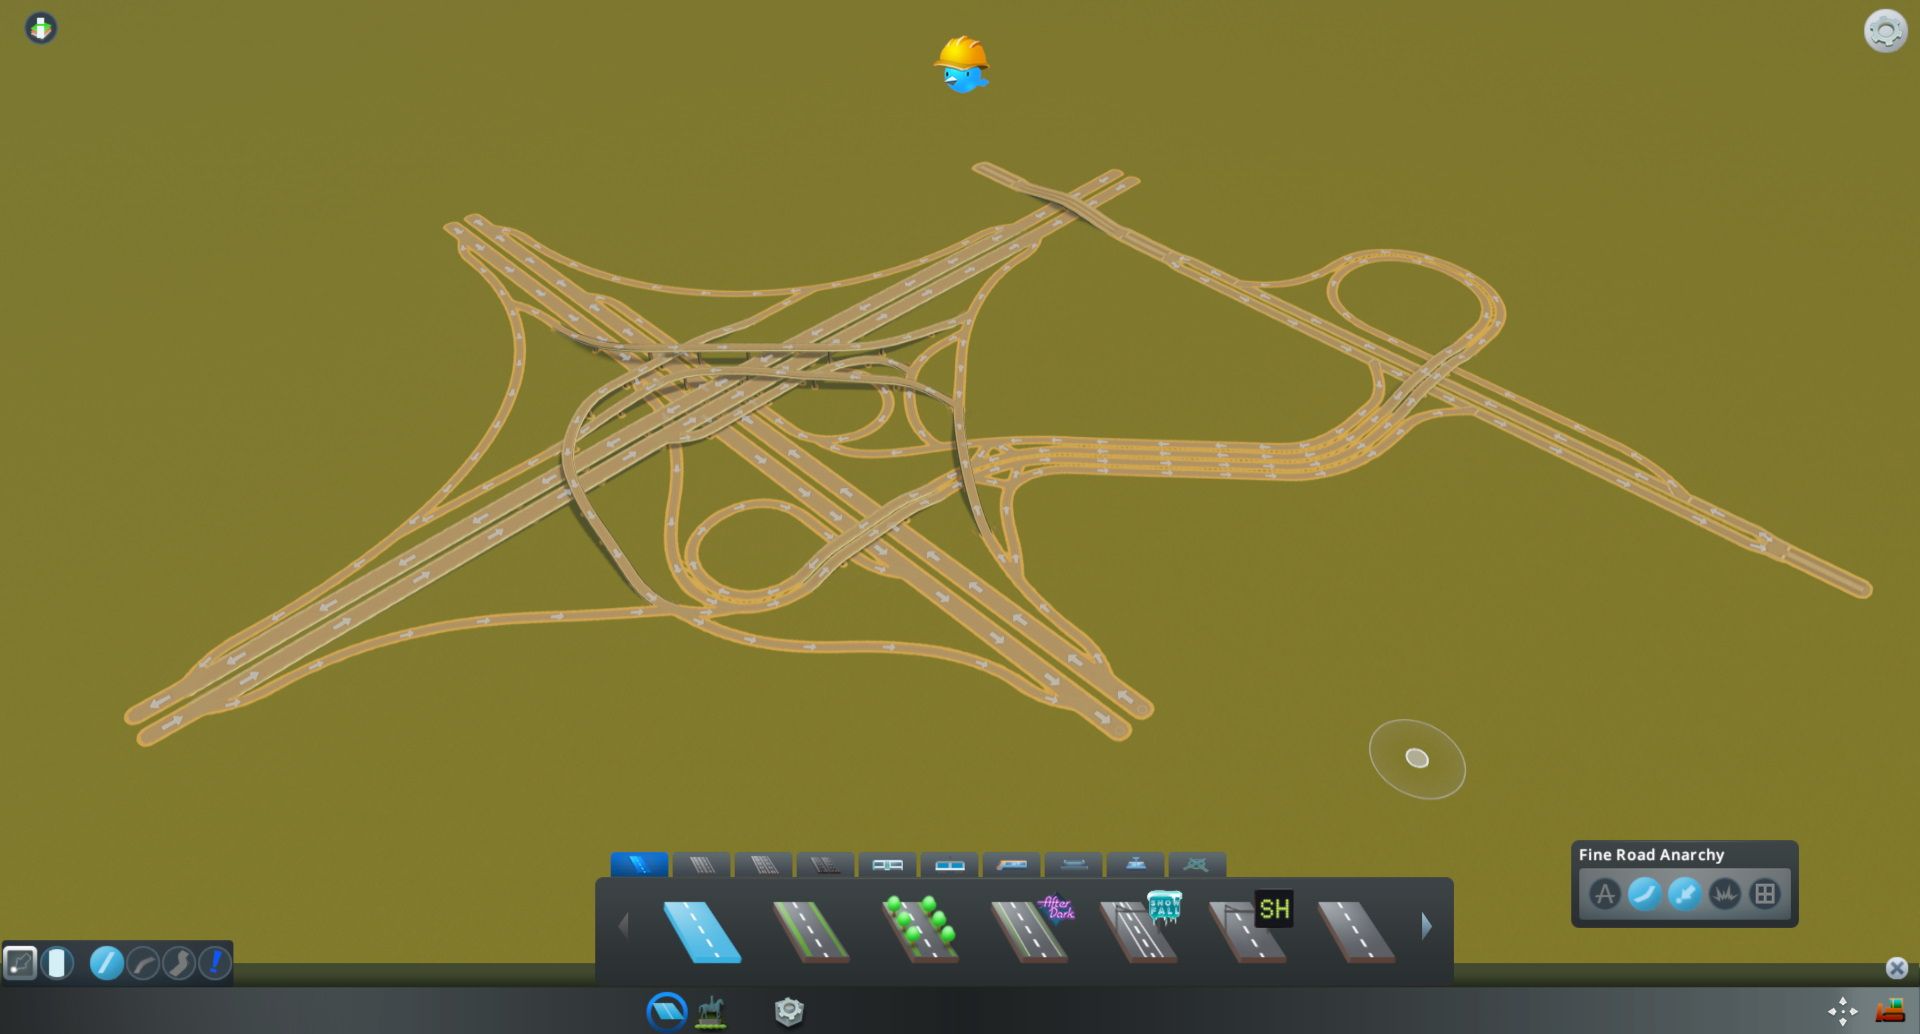 Big intersection in the Asset Editor with the Mod Fine Road Anarchy.